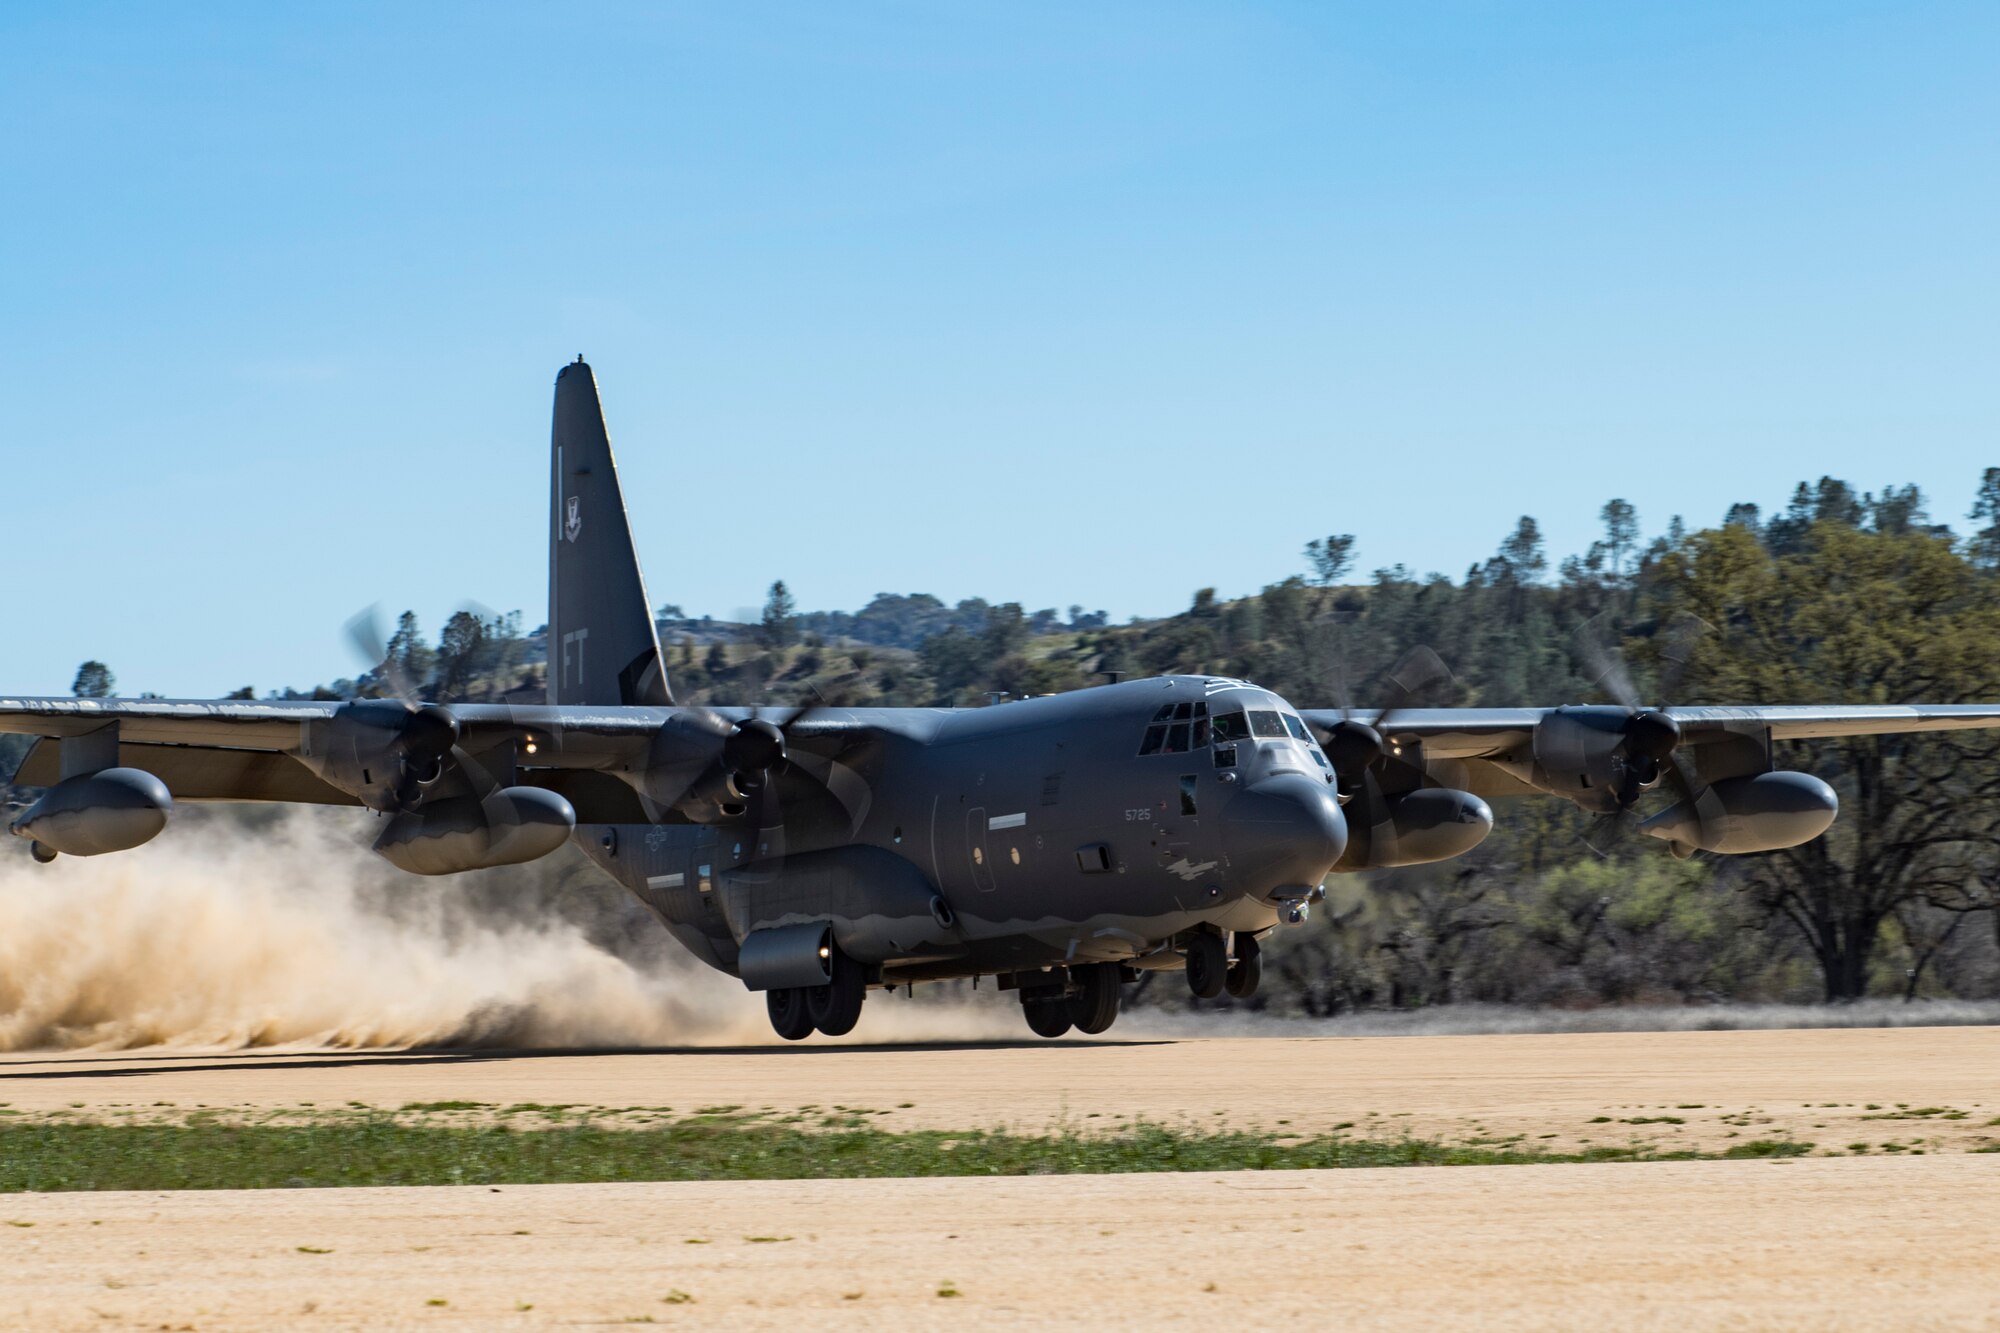 Aircrew within a HC-130J Combat King II from the from the 71st Rescue Squadron, Moody Air Force Base, Ga., performs an austere combat landing during Tiger Rescue IV, March 29, 2018, at Vandenberg Air Force Base, Calif. The four-day exercise challenged Airmen from multiple rescue squadrons to bring the capabilities of the personnel recovery triad together to successfully complete rescue missions and maintain proficiency. The three branches of the personnel recovery triad are the HC-130J, HH-60G Pave Hawk and the guardian angel weapons system or pararescuemen. (U.S. Air Force photo by Senior Airman Janiqua P. Robinson)